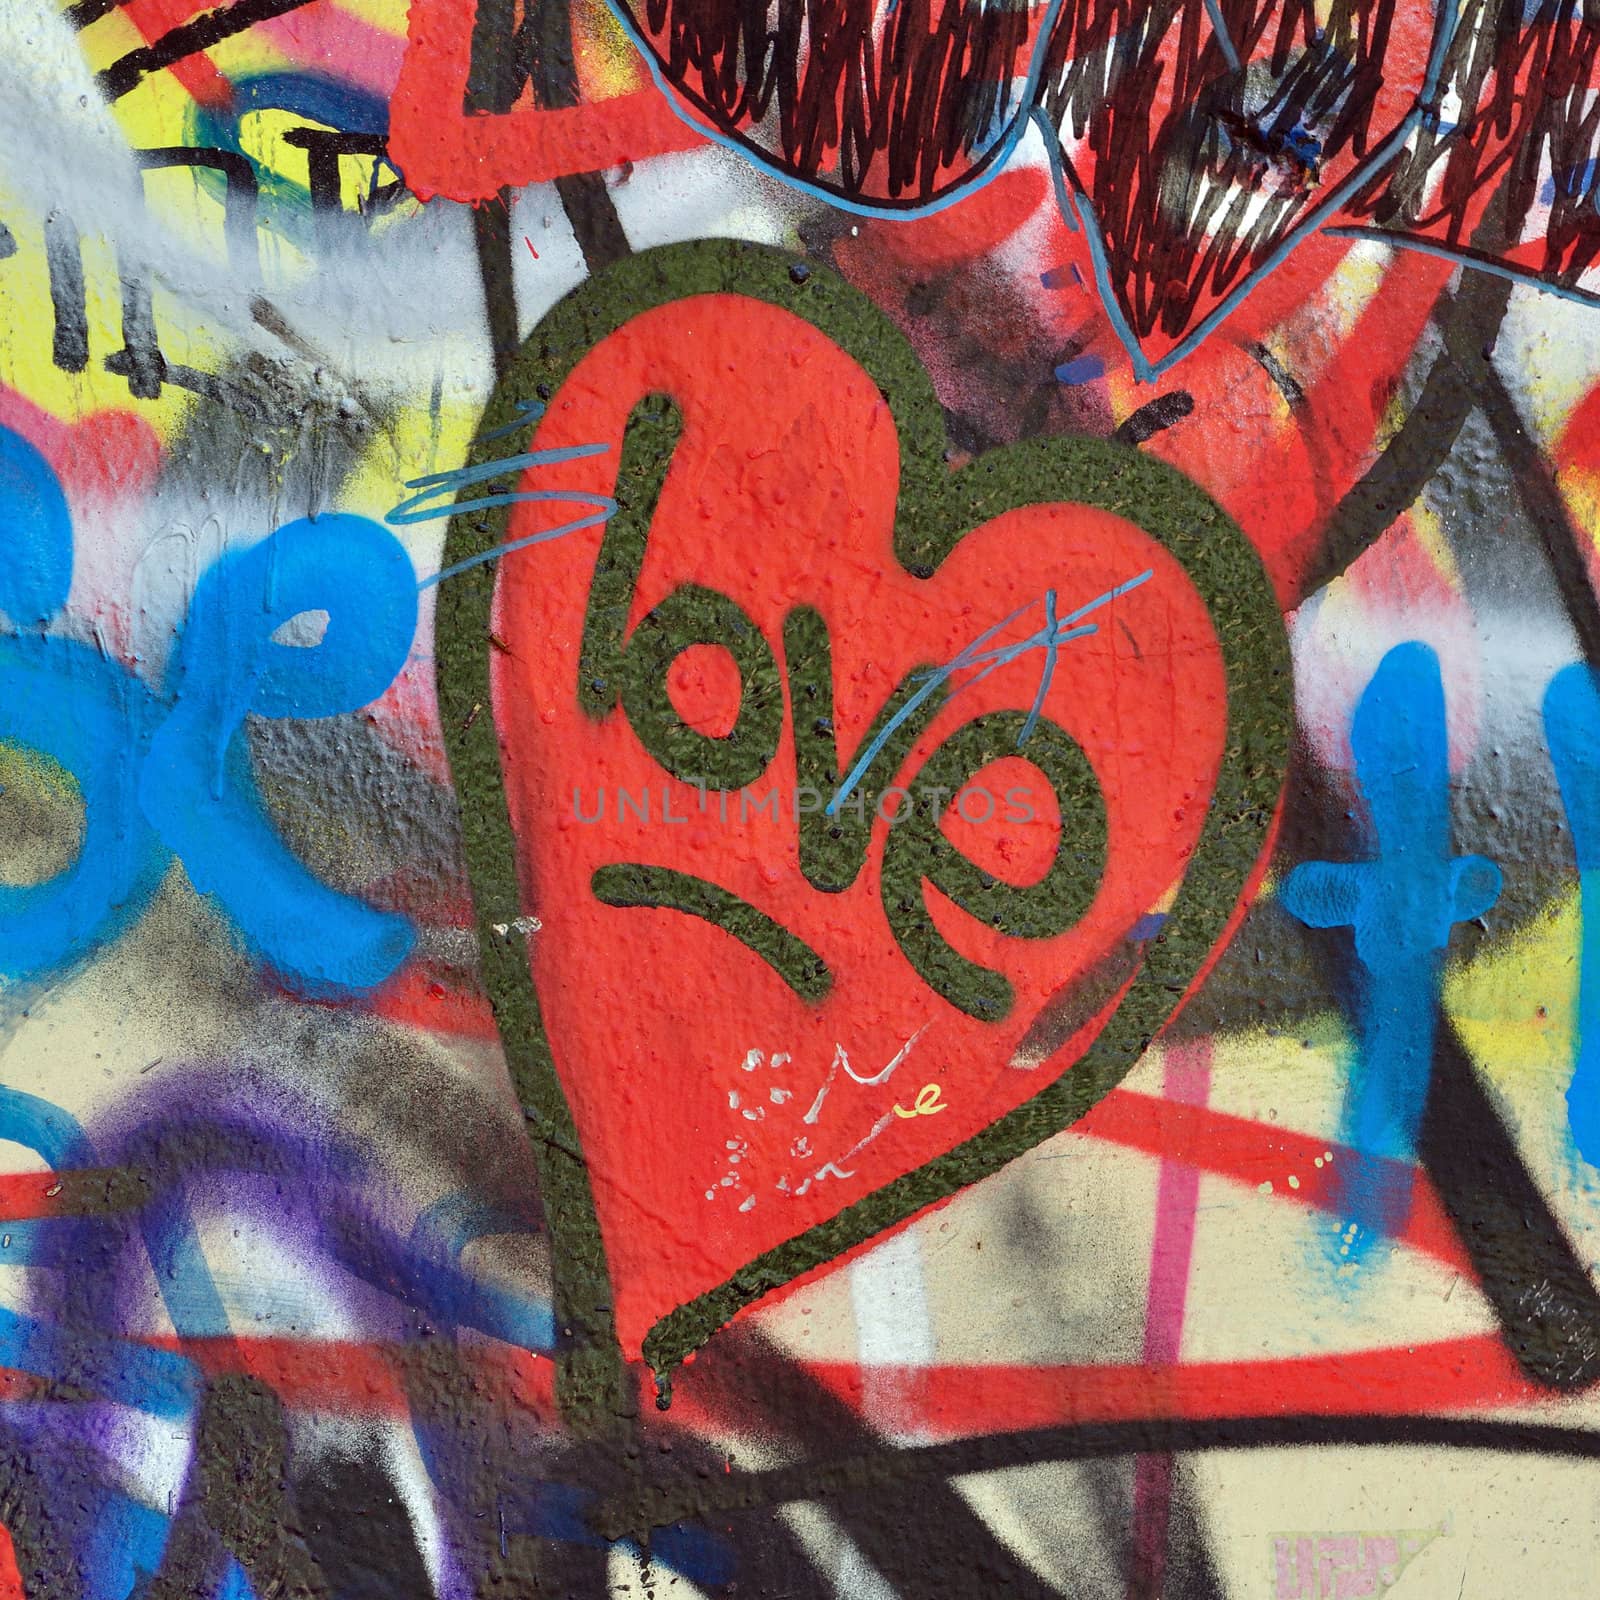 Heart graffiti over messy tagged urban wall background.